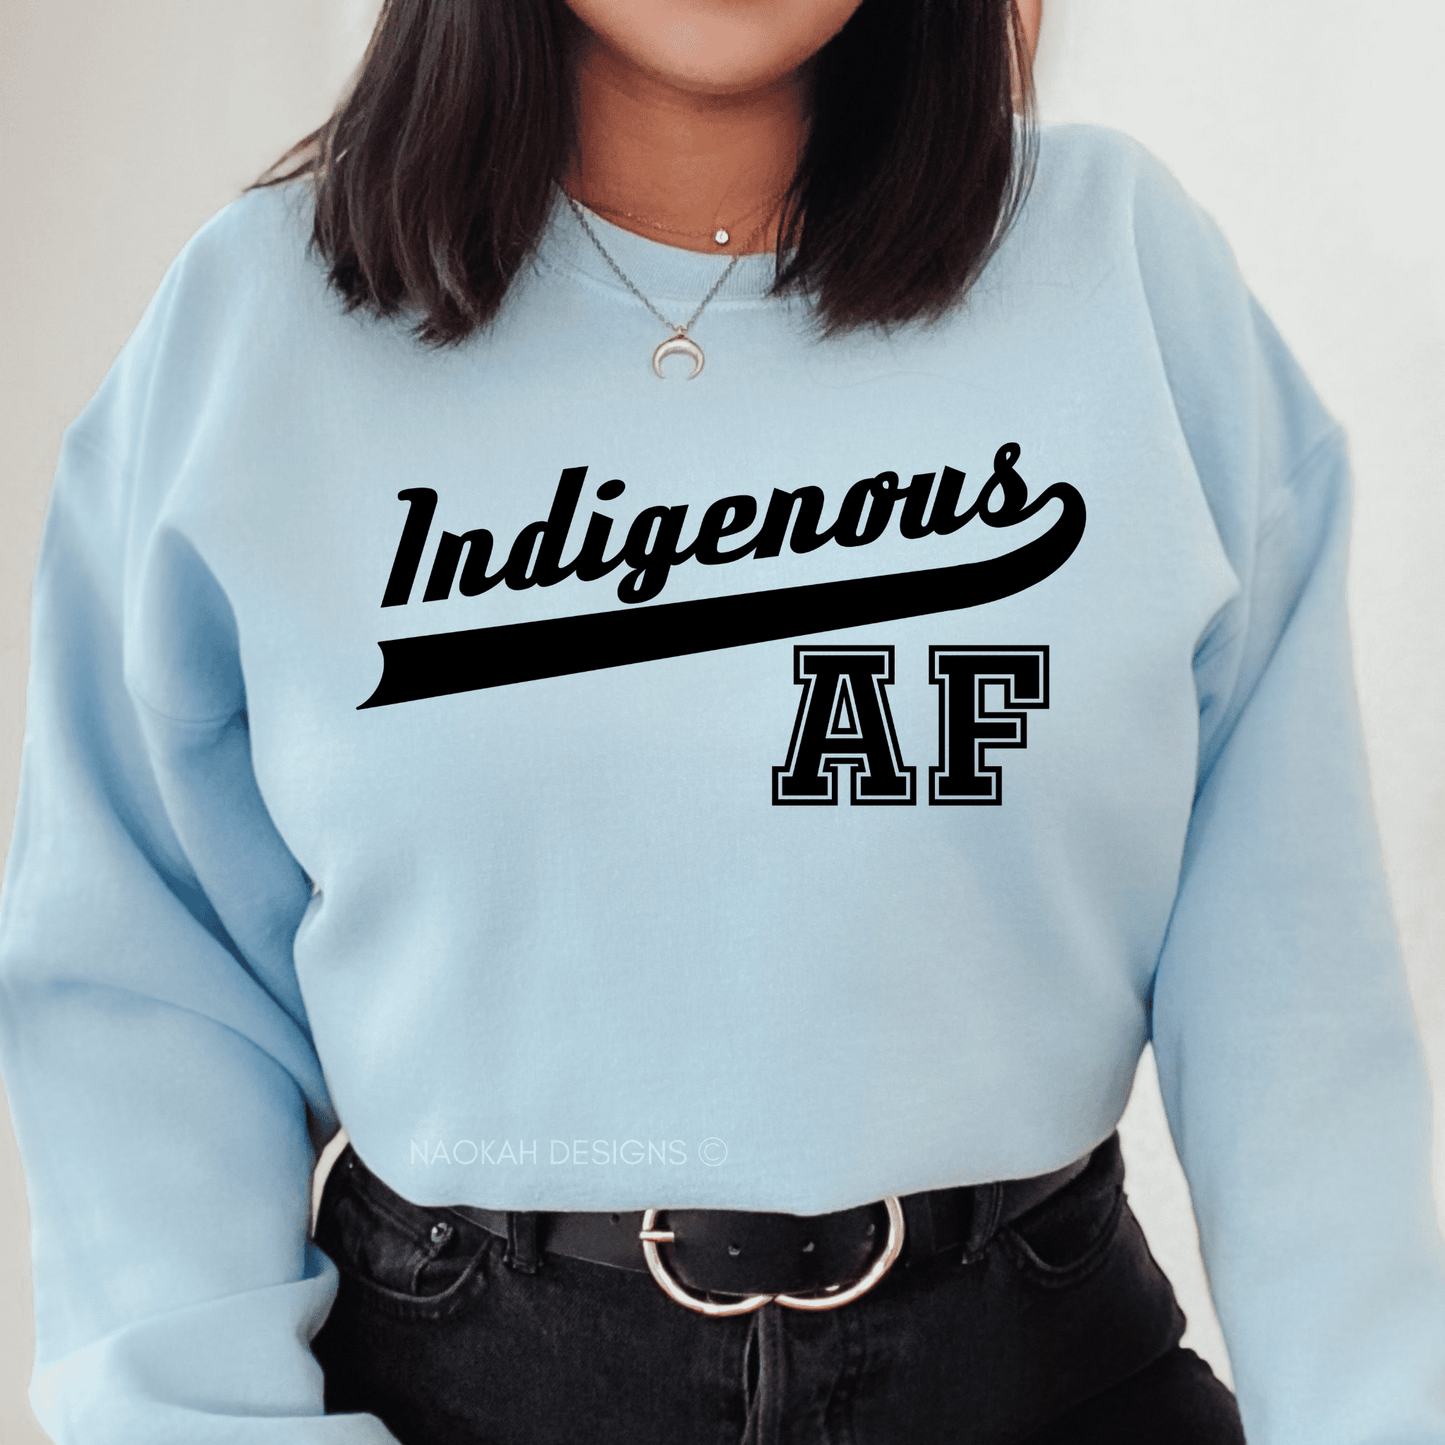 indigenous af sweater, indigenous sweater, native sweater, proud indigenous sweater, native pride, indigenous resilience sweater, native af